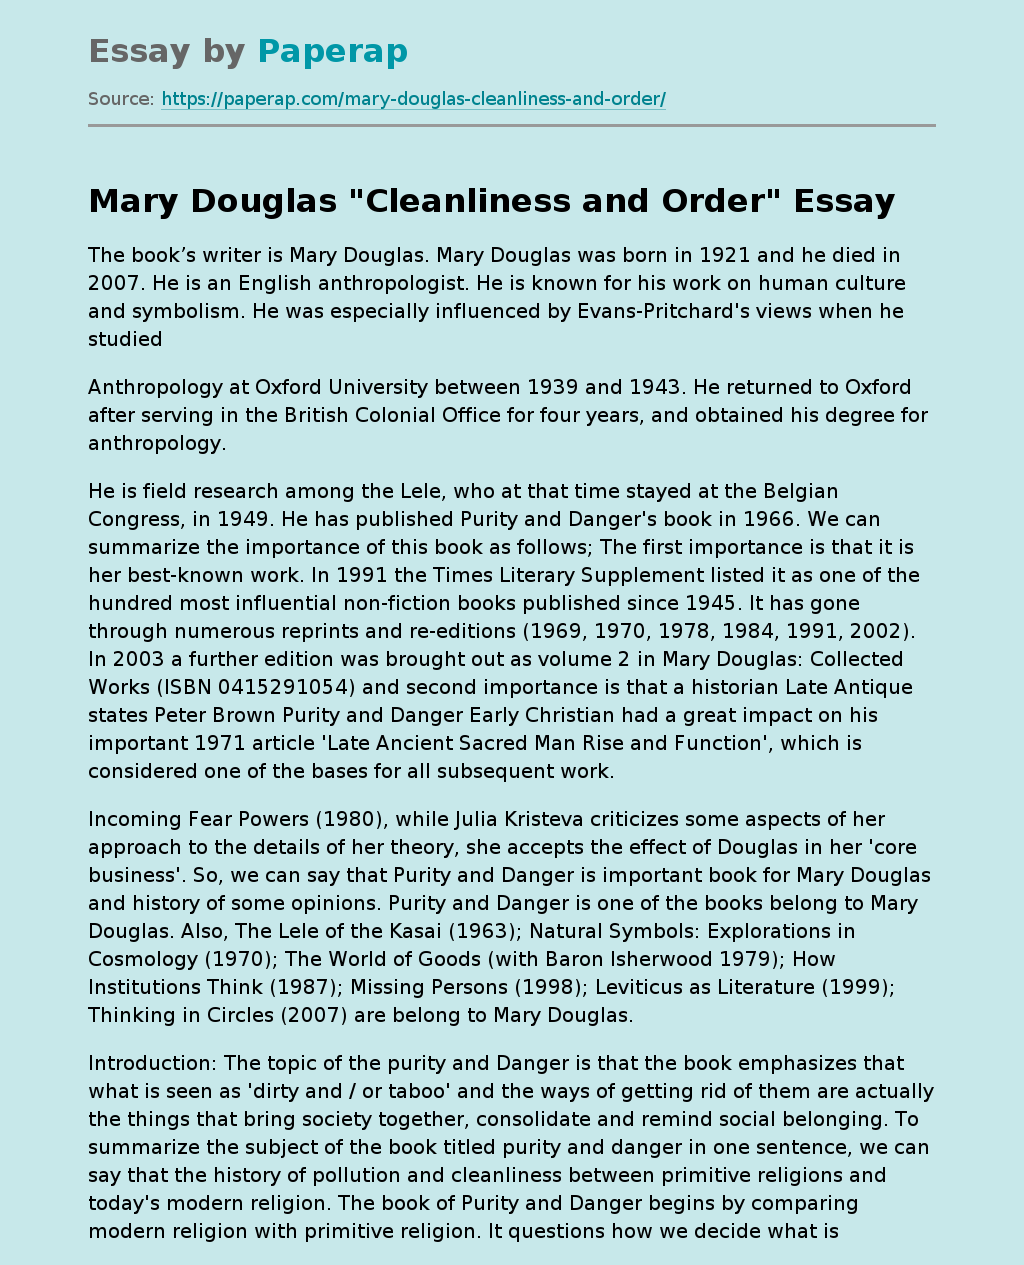 Mary Douglas "Cleanliness and Order"